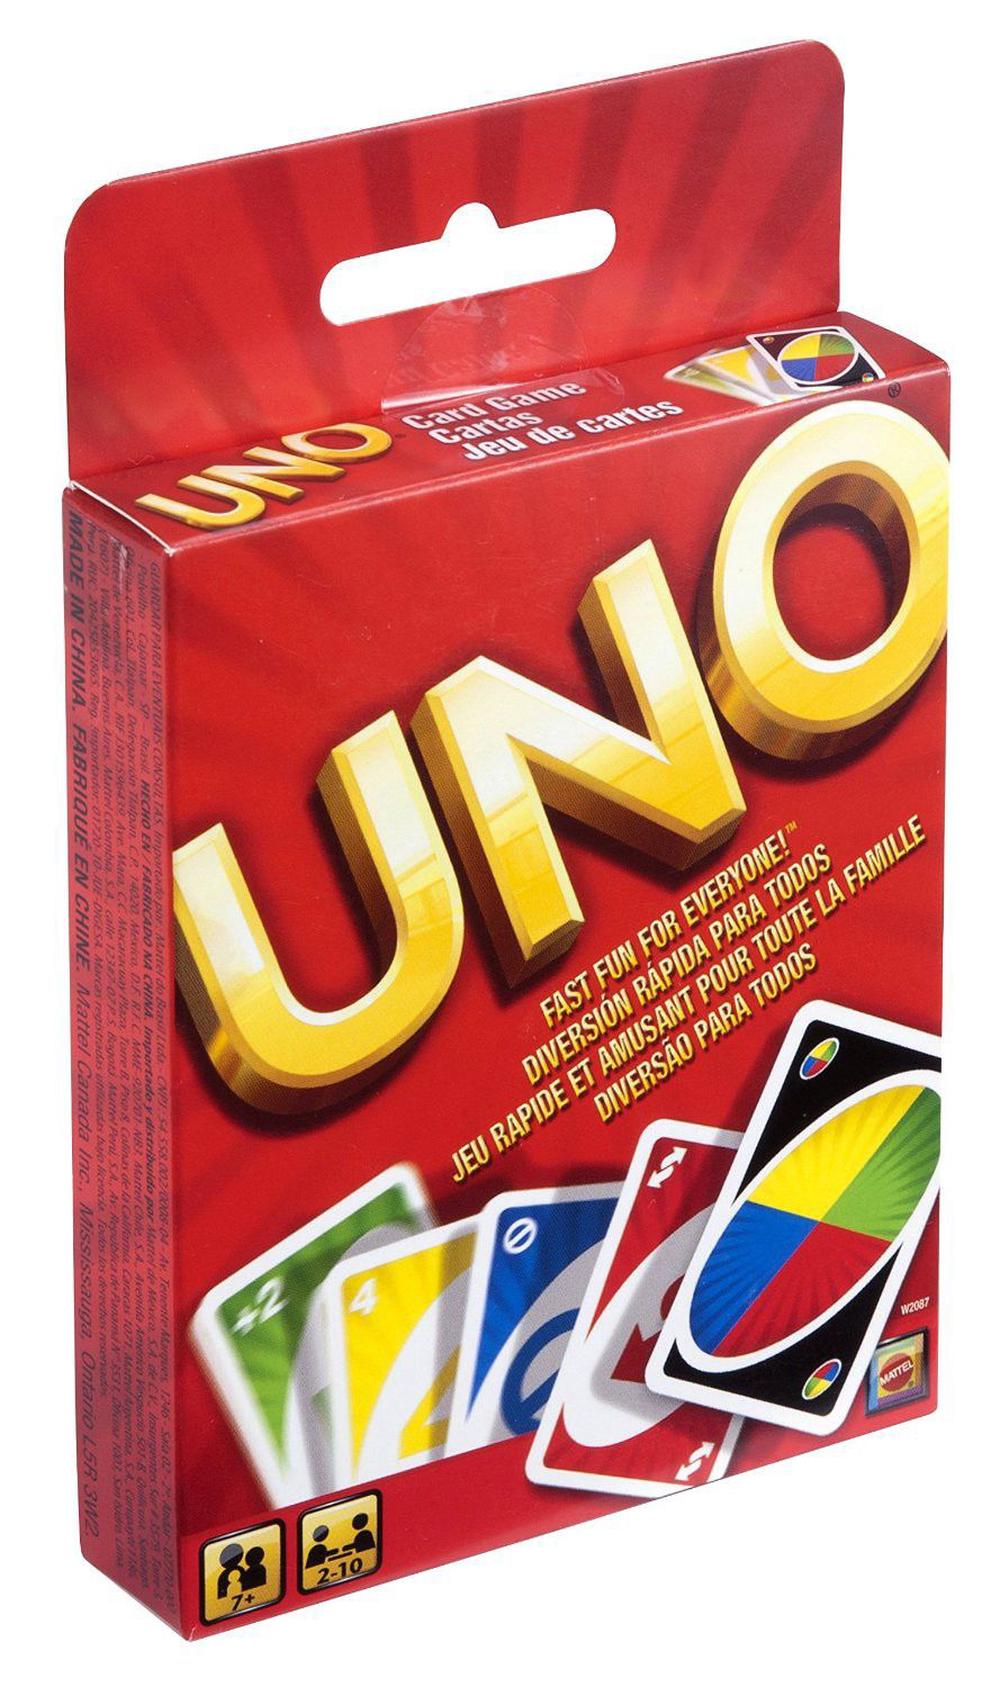 Mattel UNO Card Game | Buy online at The Nile